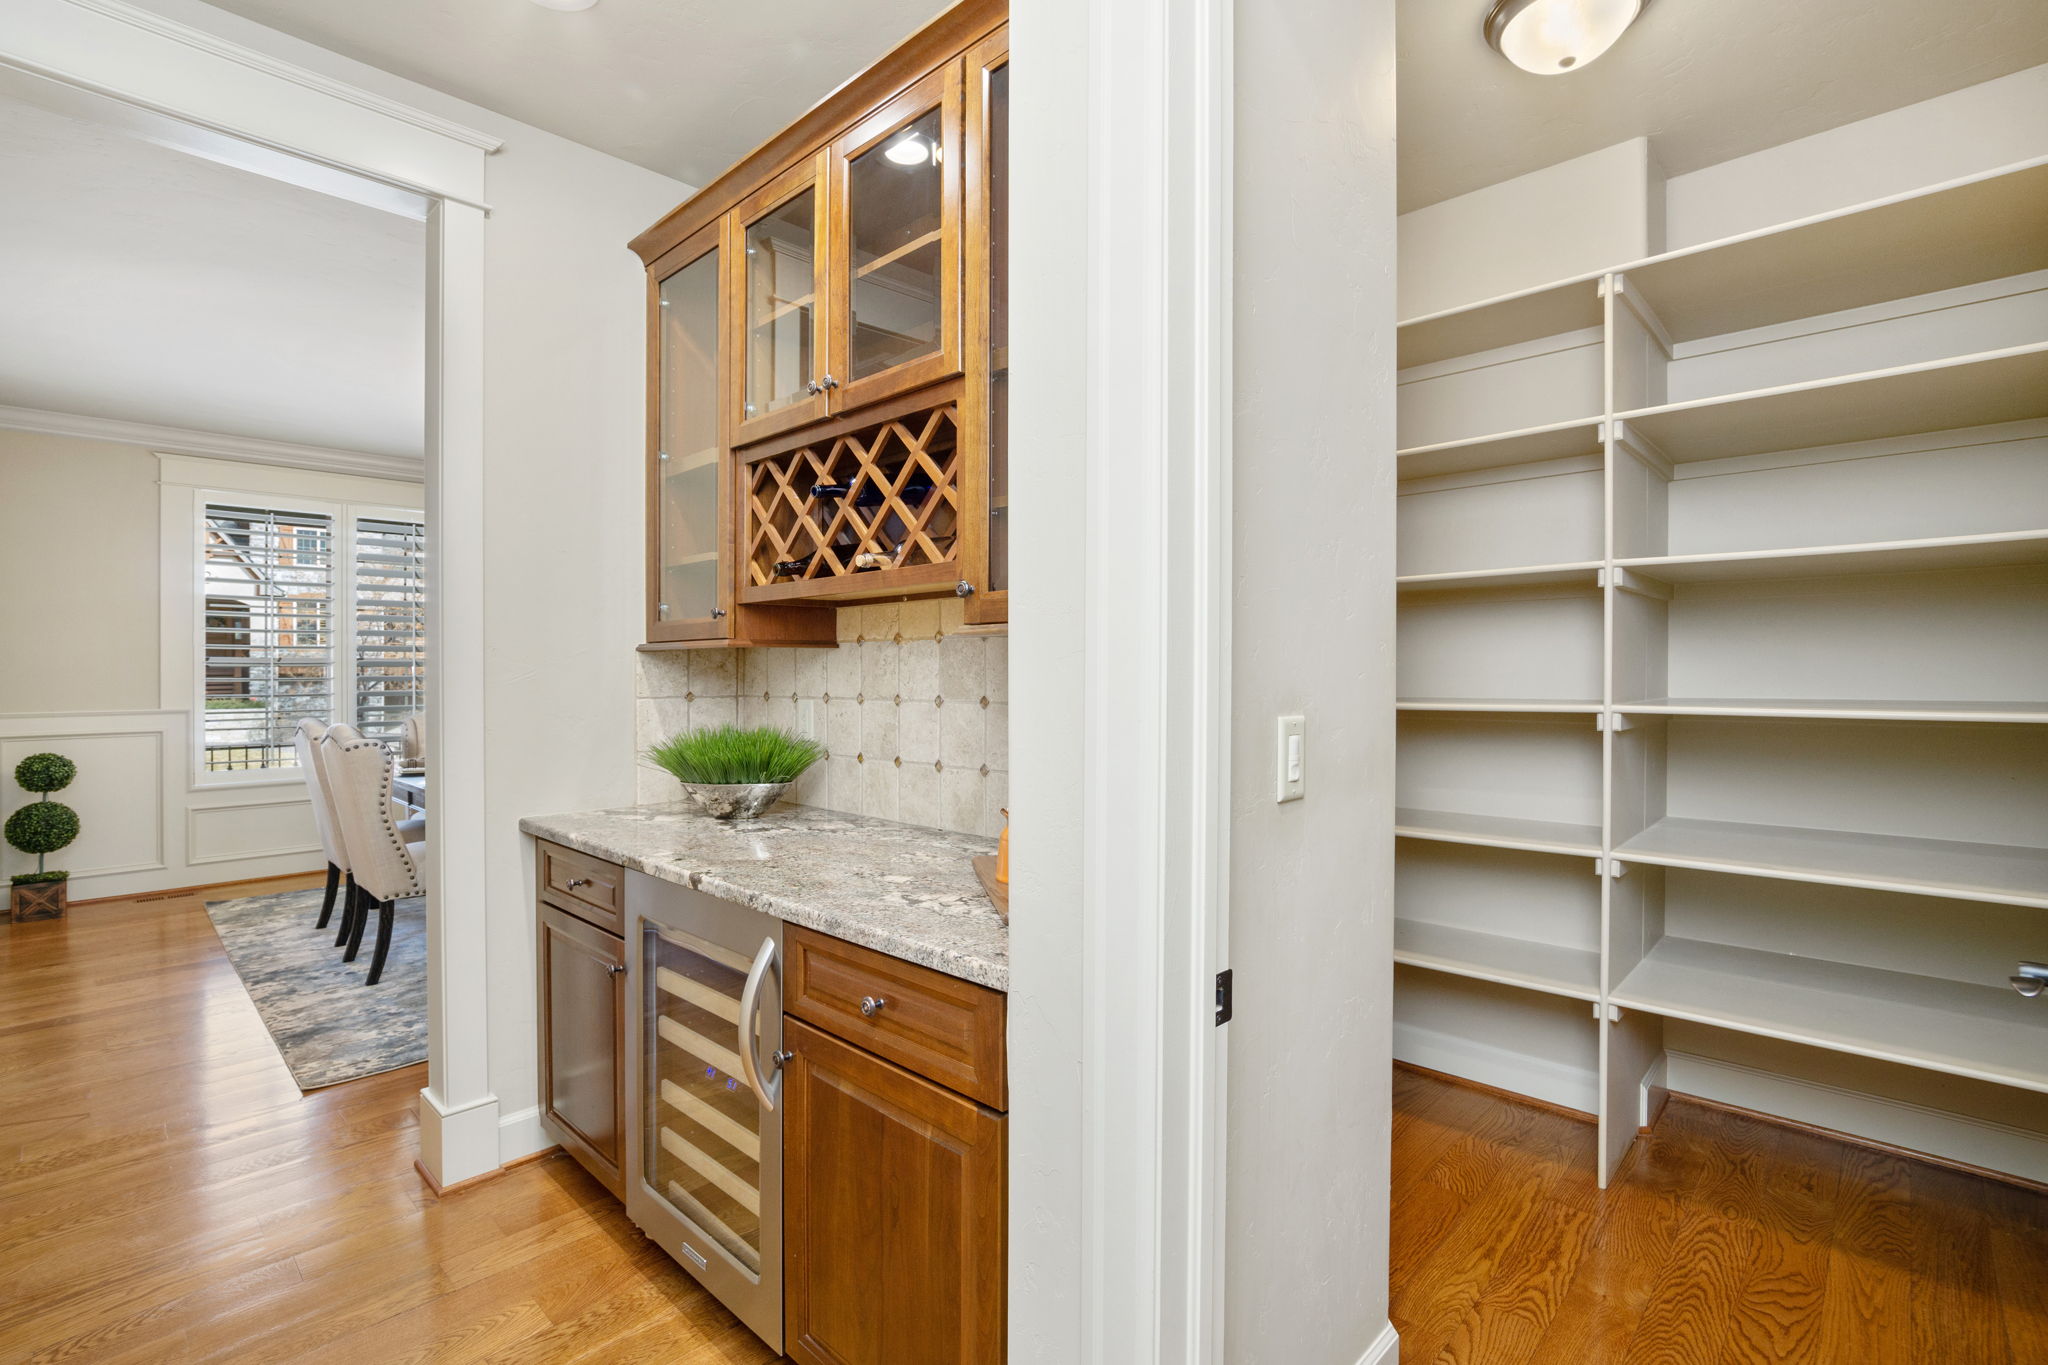 Butlers Pantry with wine fridge and large walk-in pantry